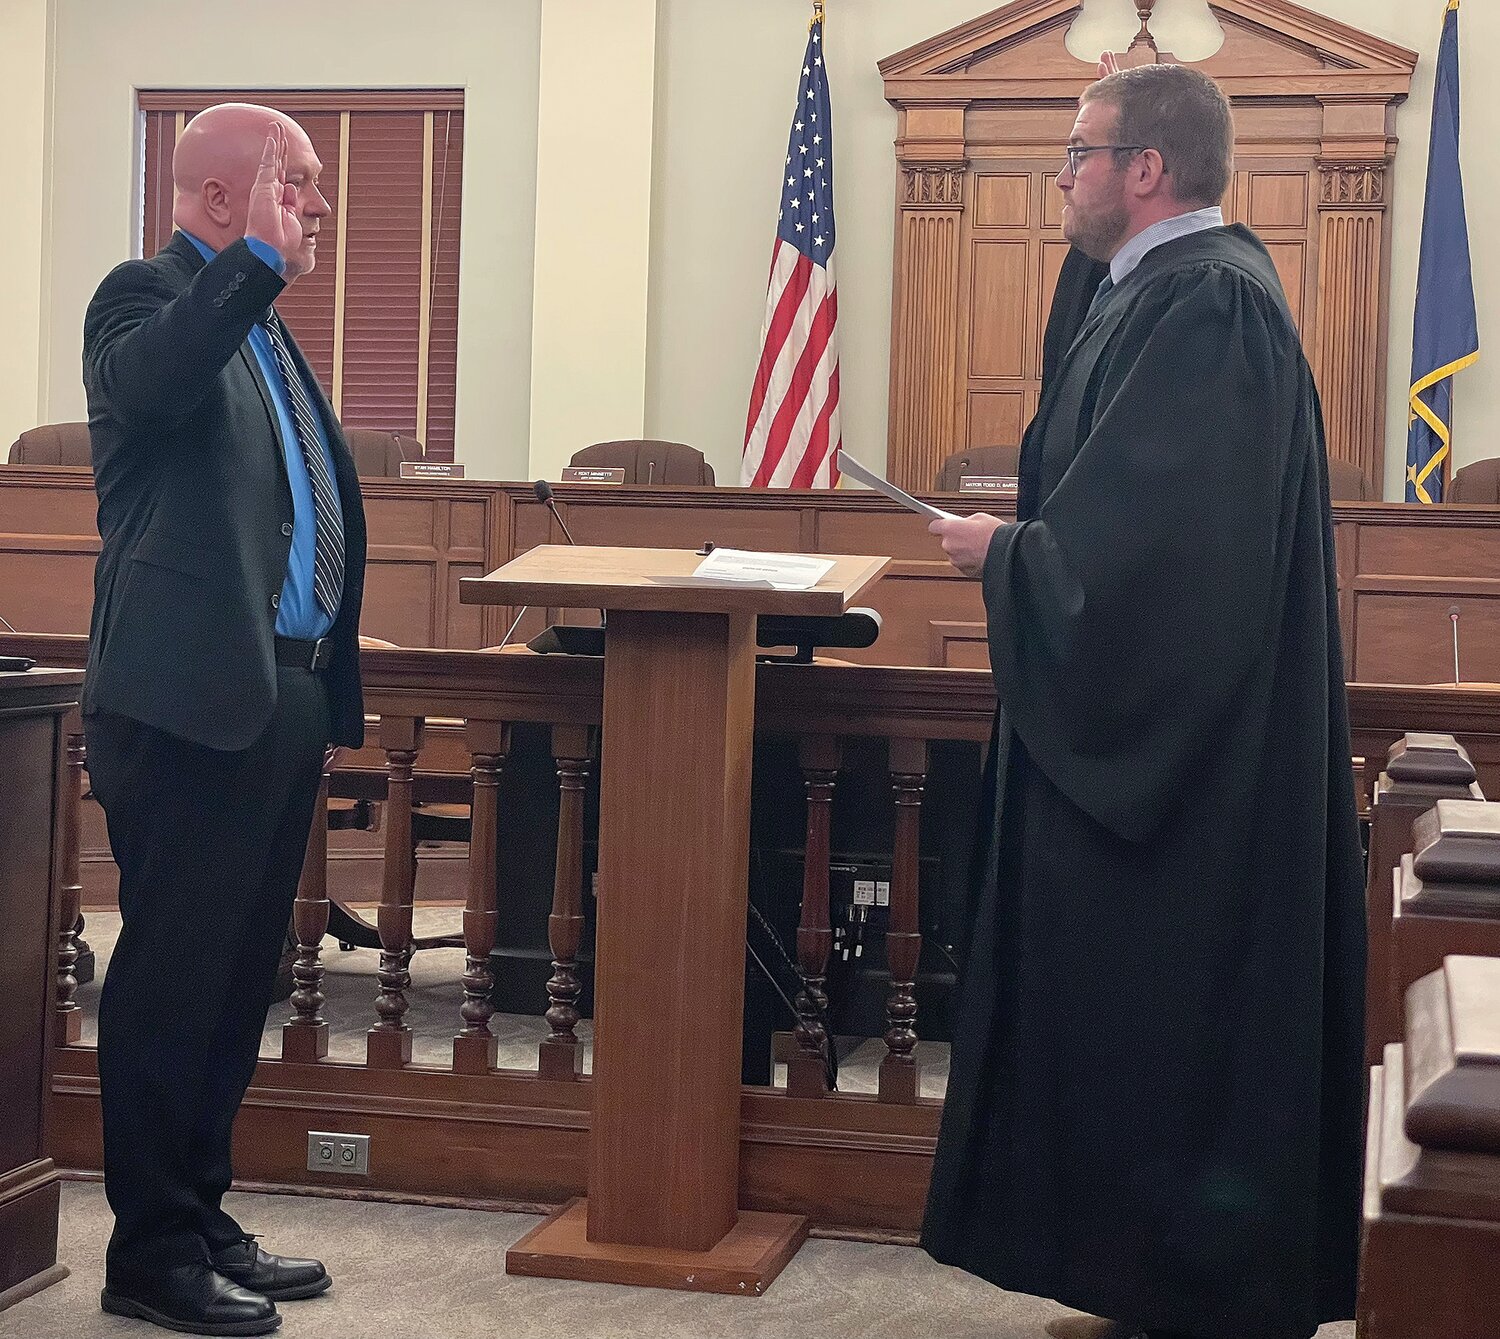 Mayor Todd Barton, left, takes an unprecendented fourth oath of office on Monday in the council chamber of the City Building. Montgomery County Superior Court II Judge Daniel Petrie administers the oath.